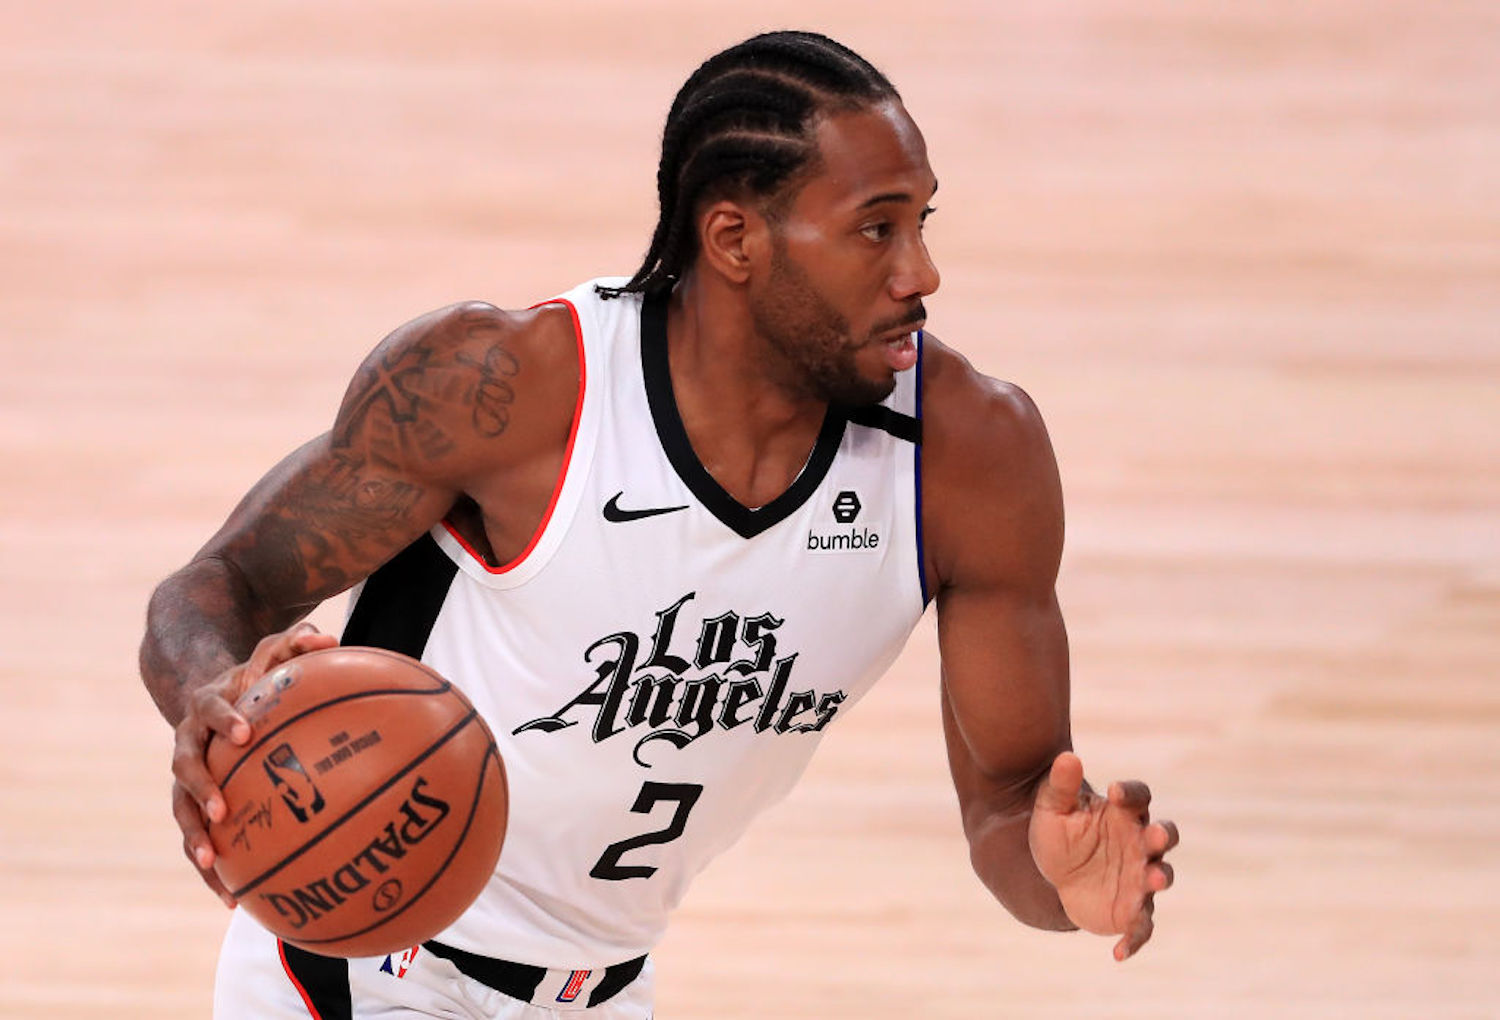 Kawhi Leonard has done some incredible things on a basketball court, but his latest highlight proves he might not even be human.